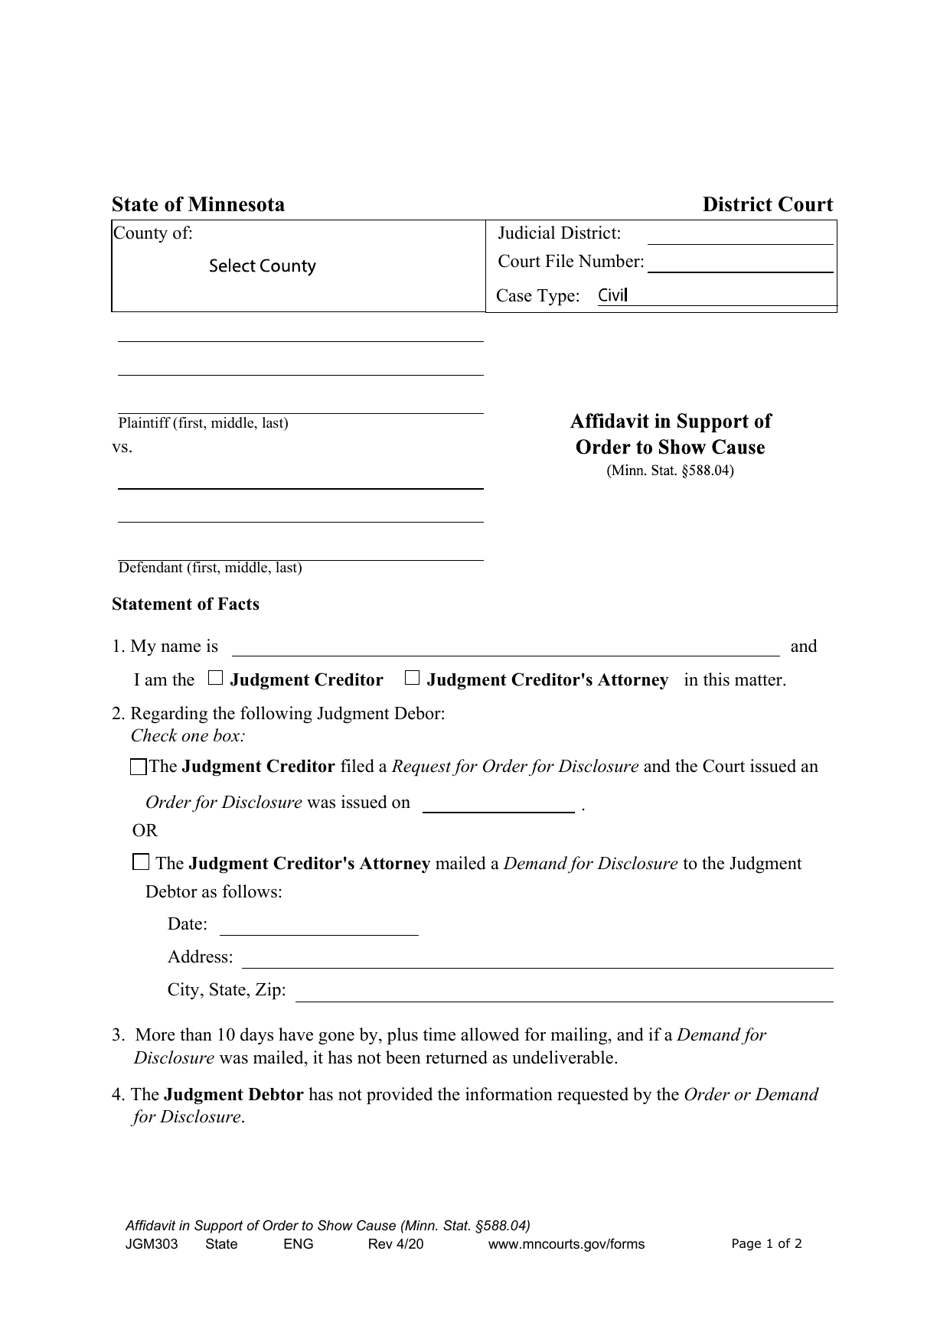 Form JGM303 Affidavit in Support of Order to Show Cause - Minnesota, Page 1